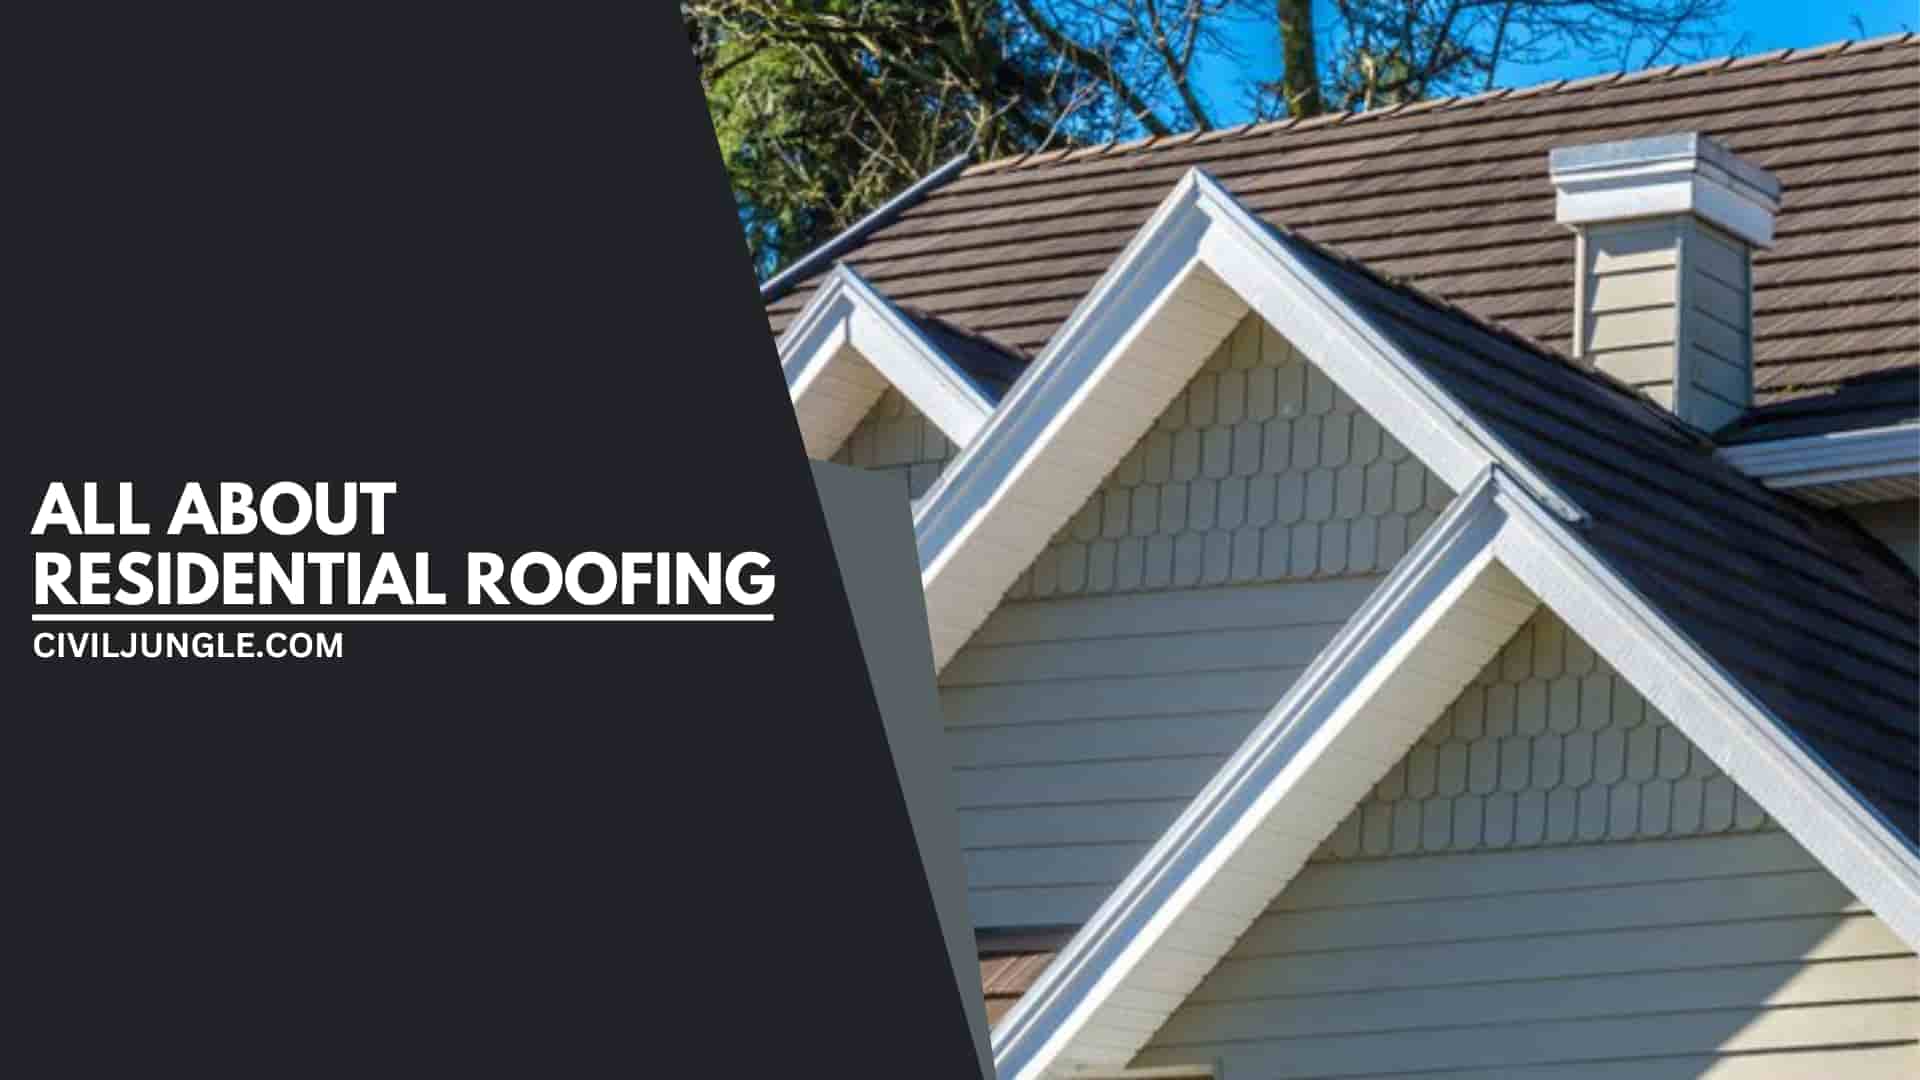 All About Residential Roofing